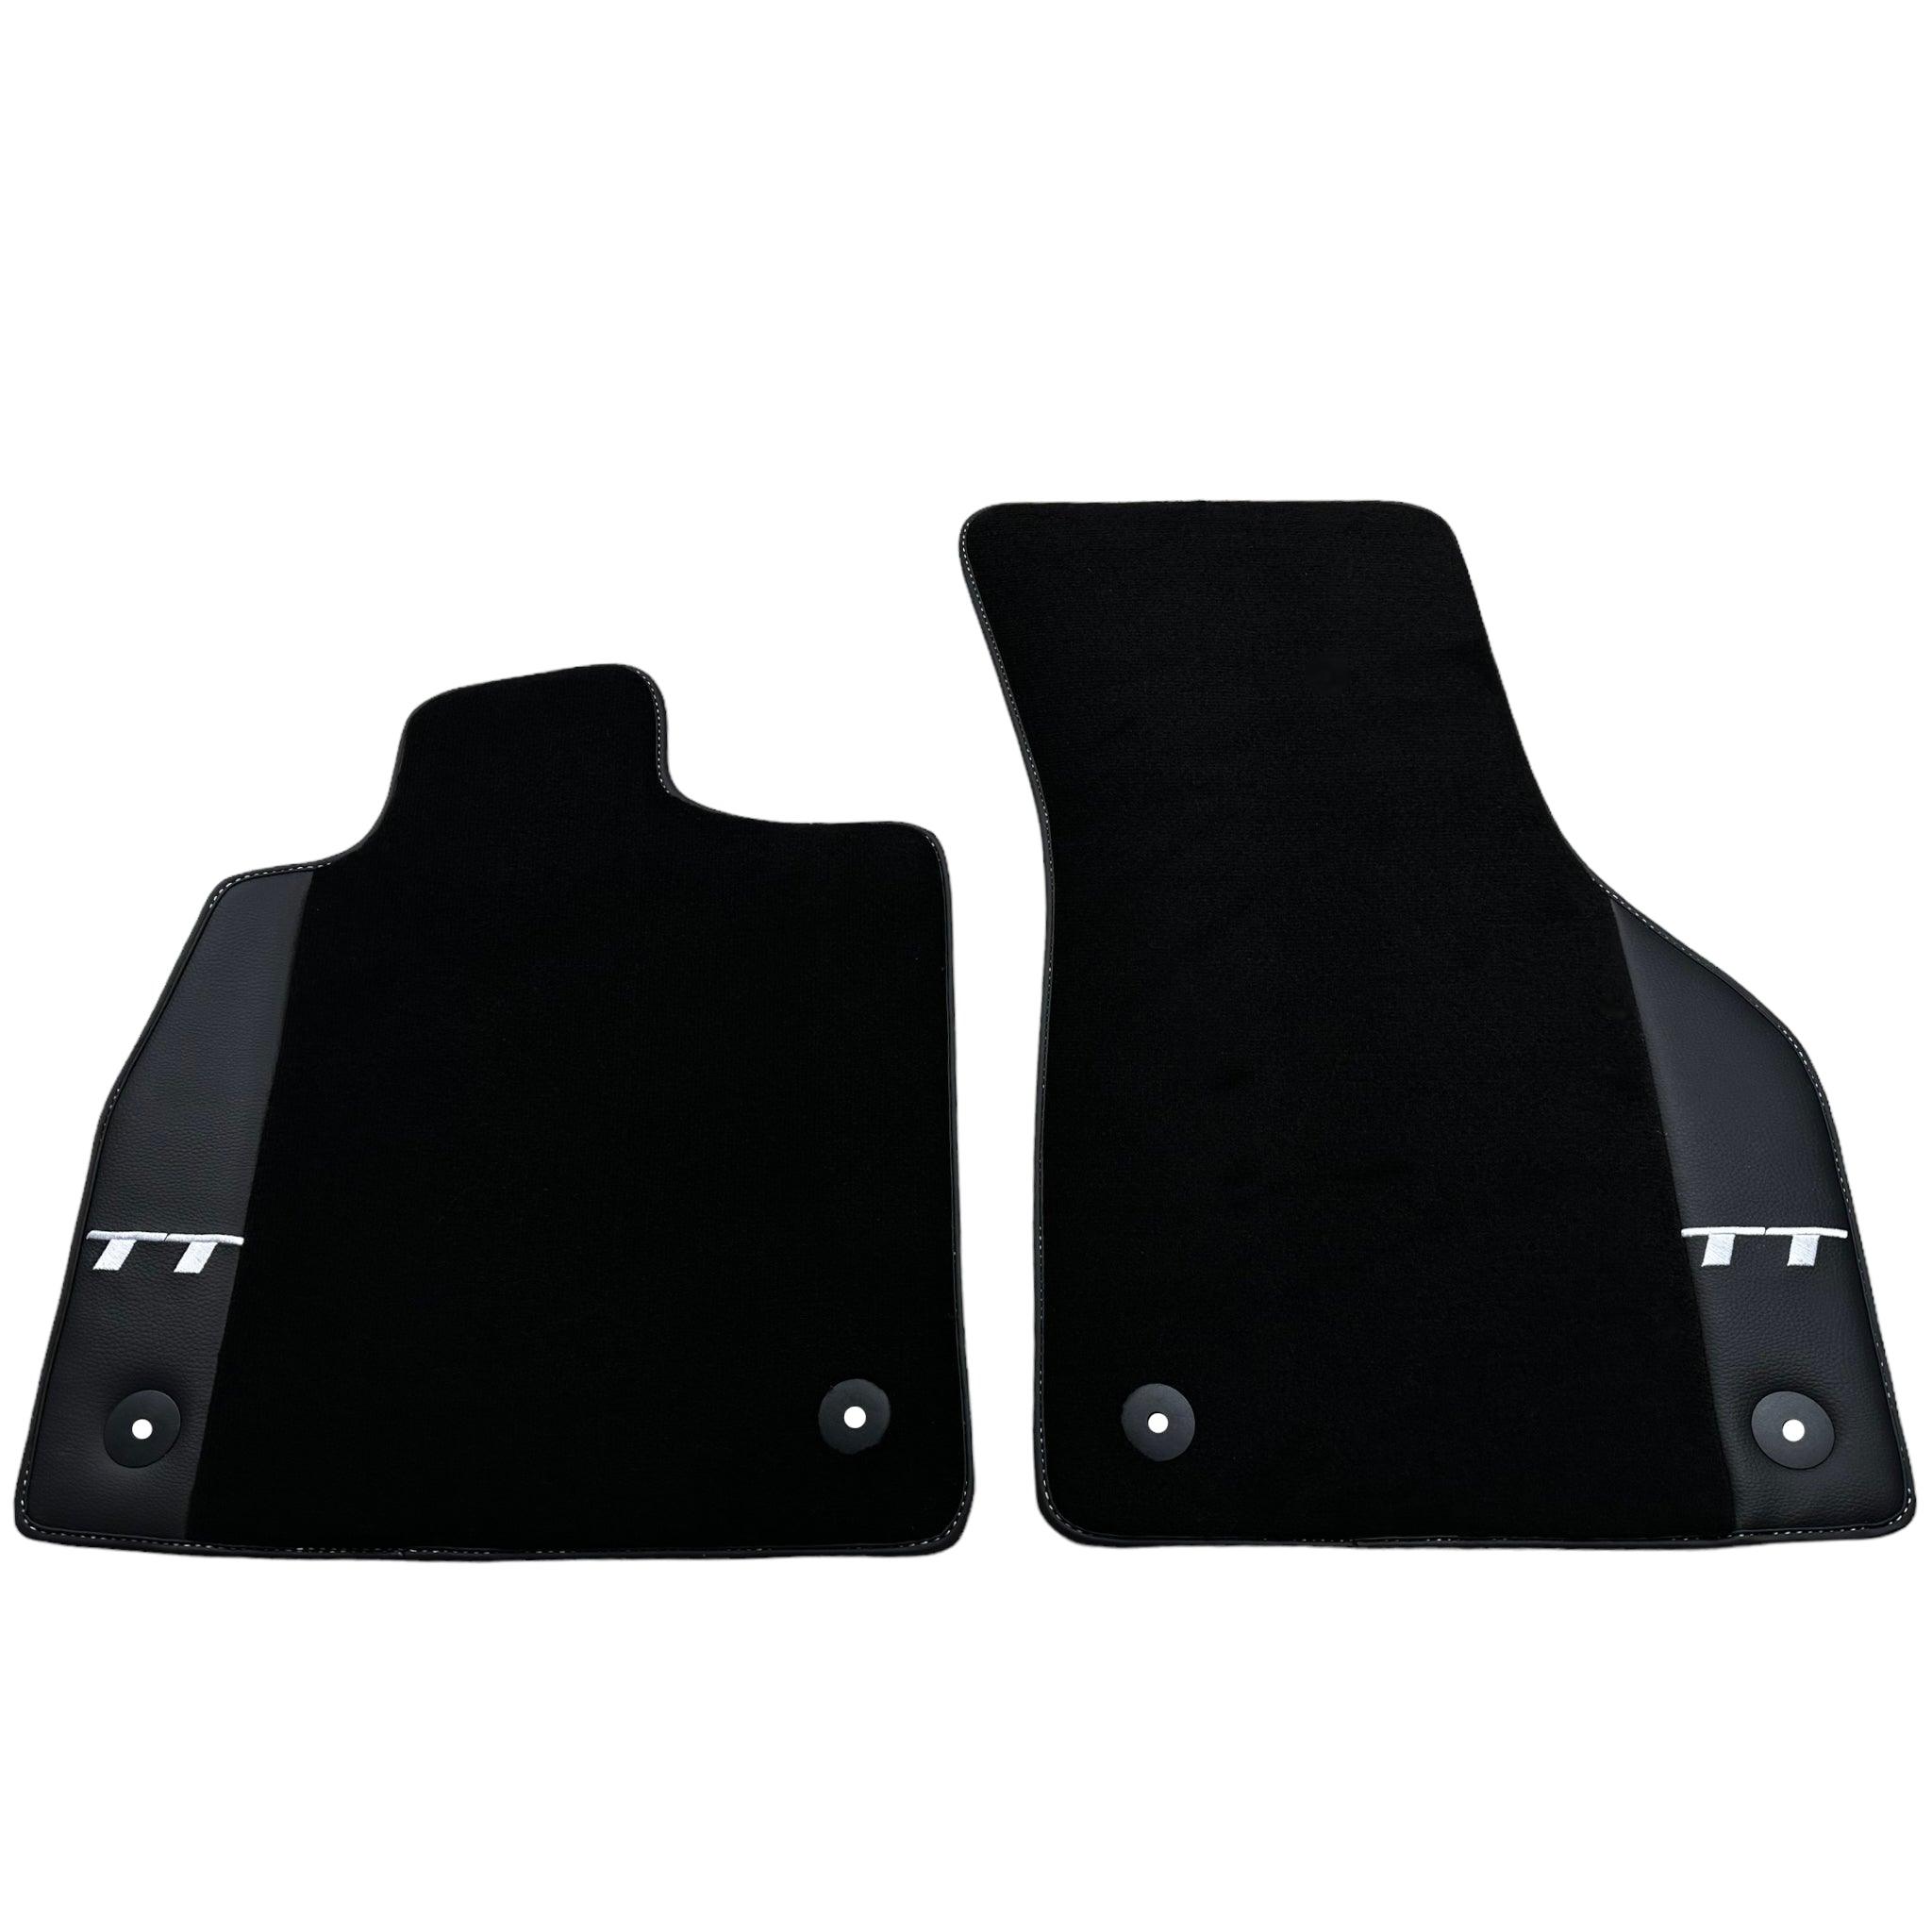 Black Floor Mats for Audi TT MK1 Coupe (1998-2006) with Leather